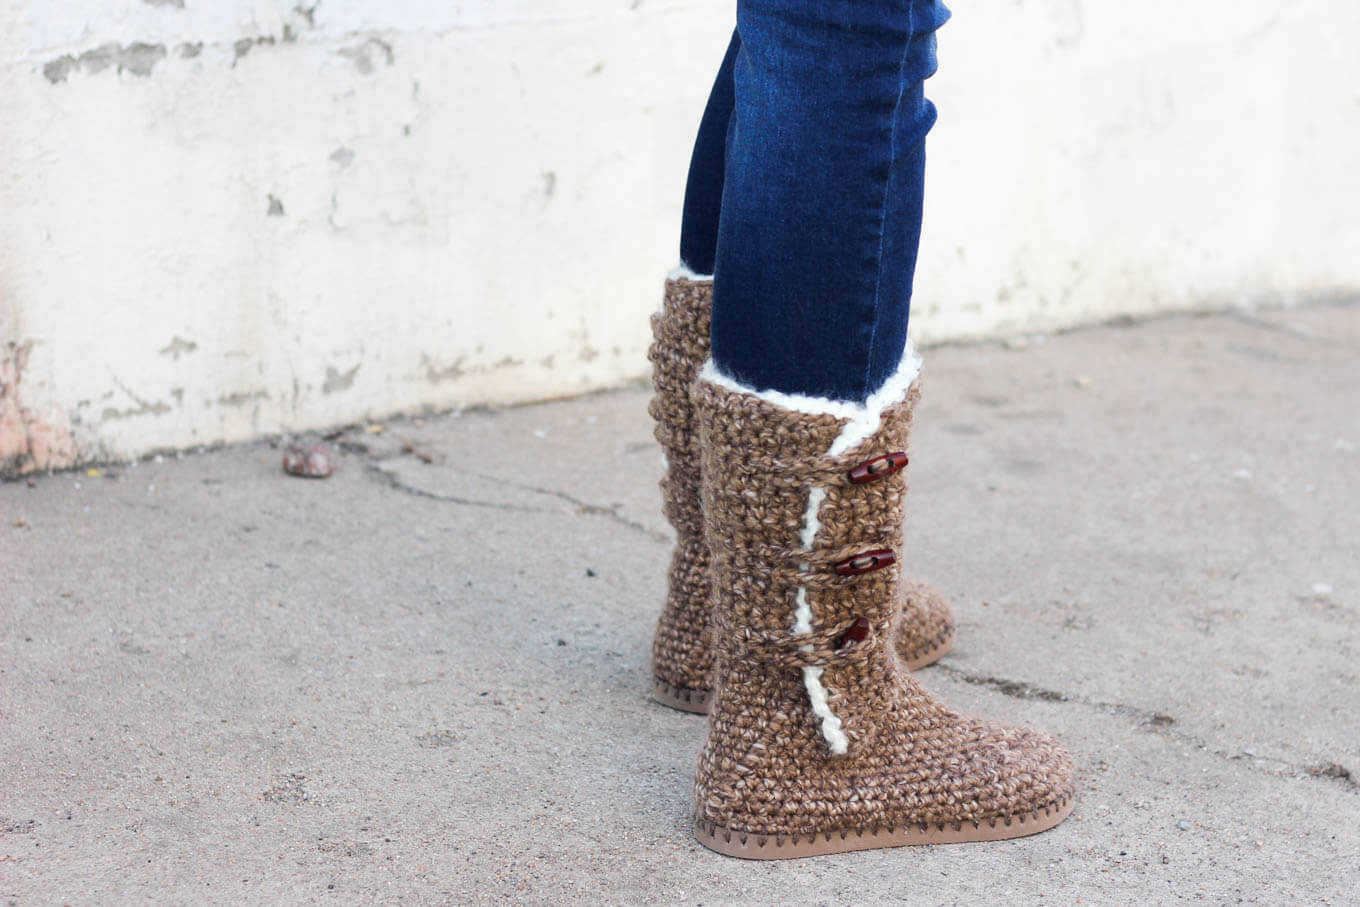 Crochet Boots Pattern For Adults Ugg Style Crochet Boots With Flip Flop Soles Free Pattern Video